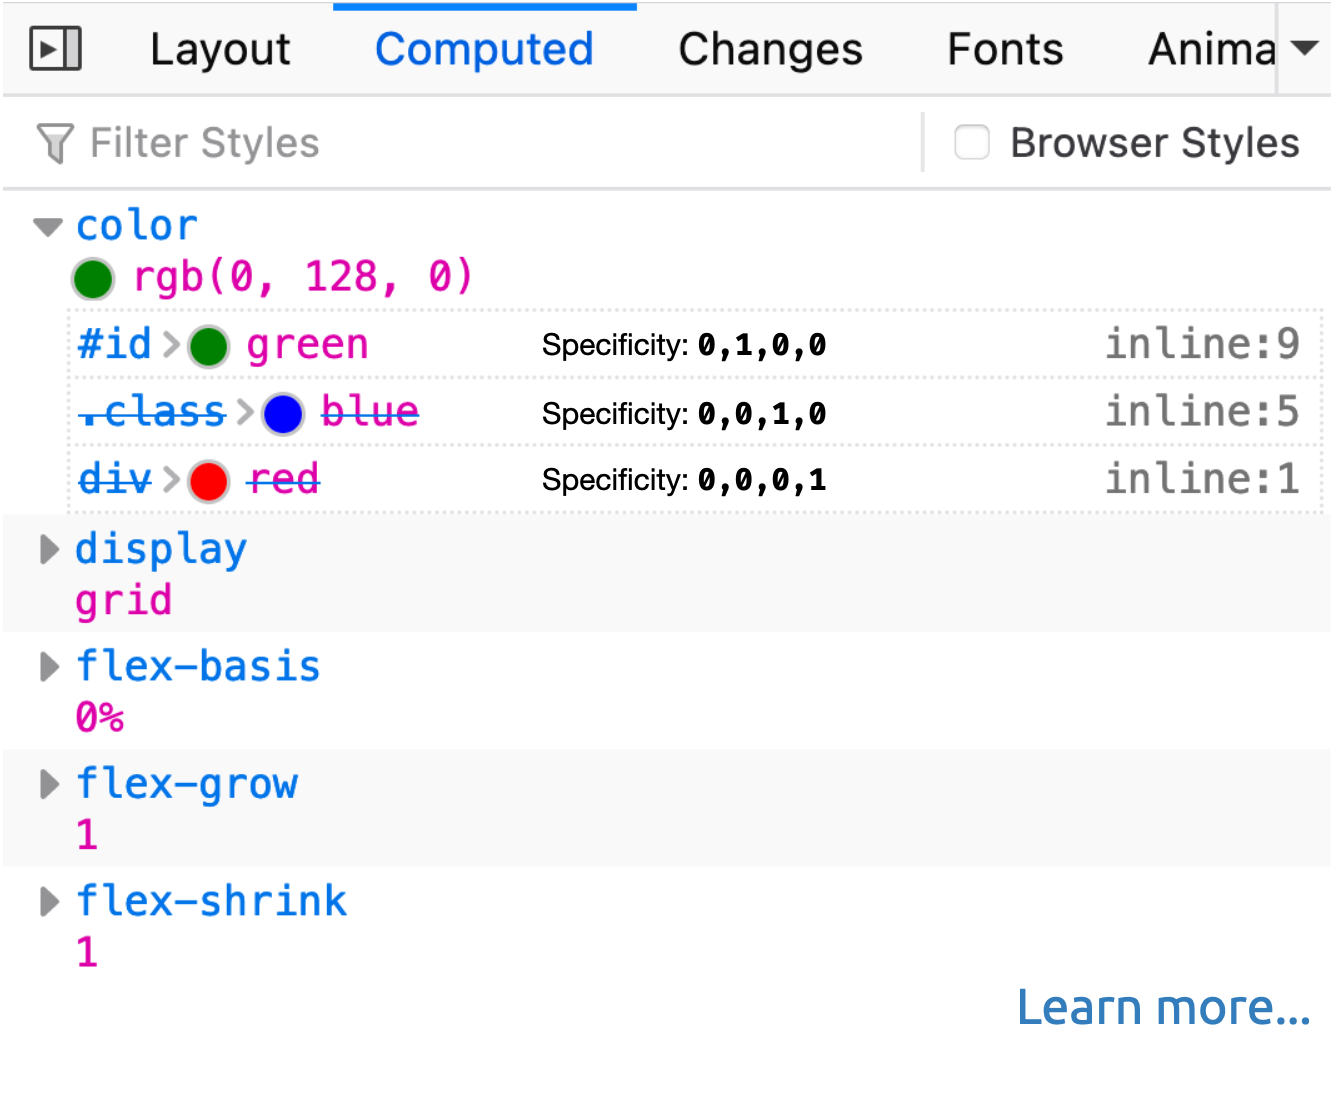 Proposal for devtools explaining the Cascade and showing selector specificity.